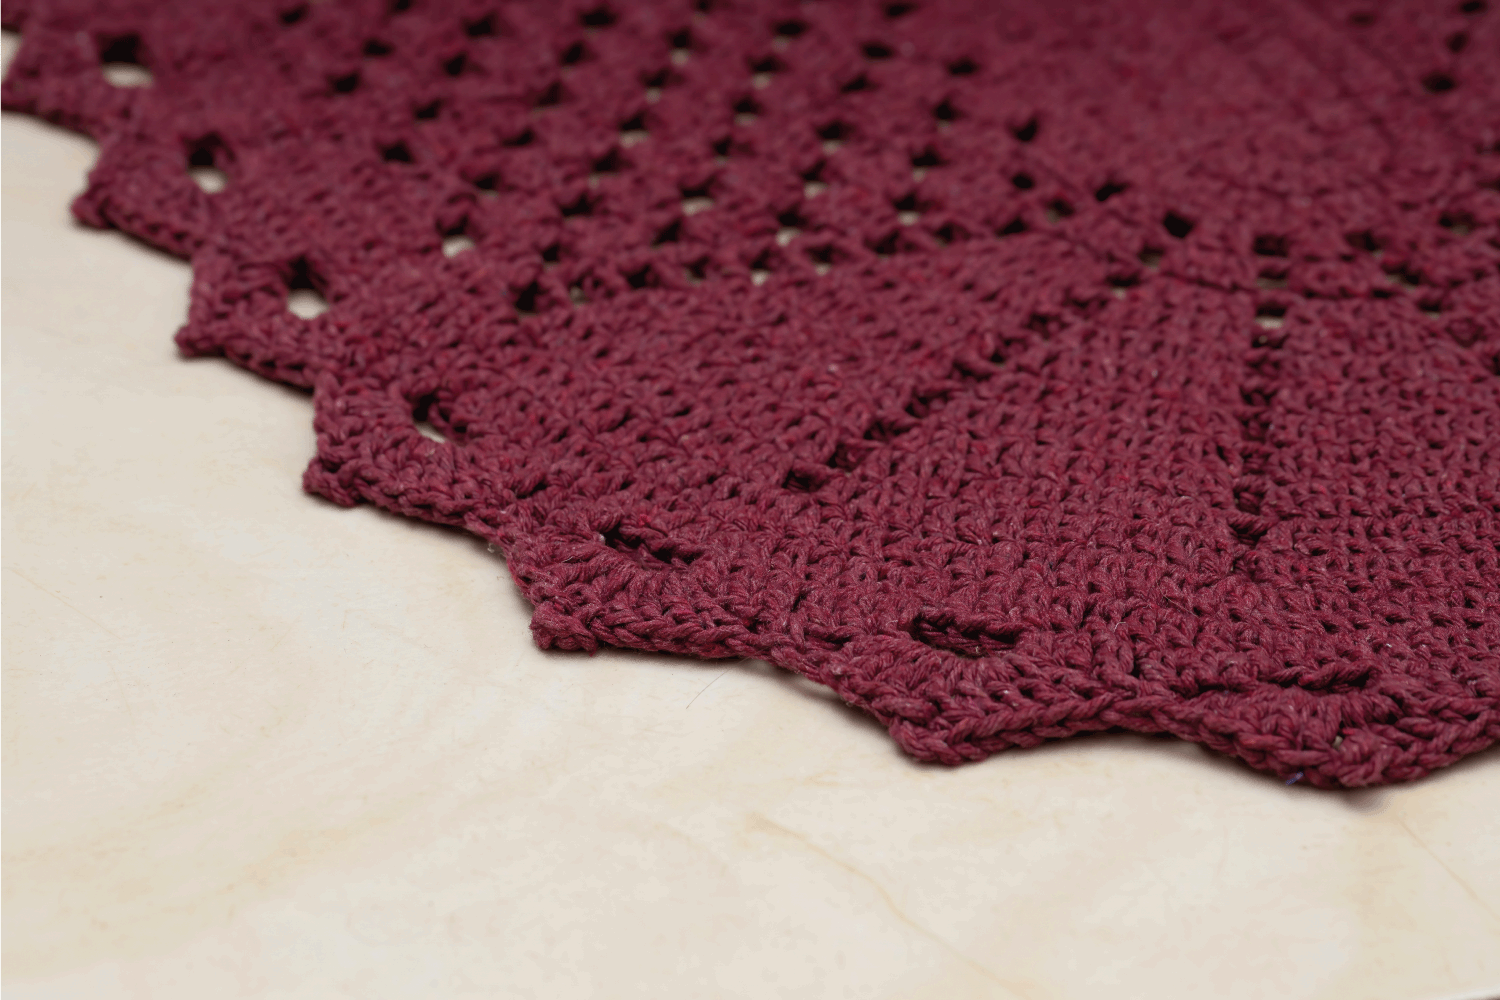 Red crochet rug handmade in close up